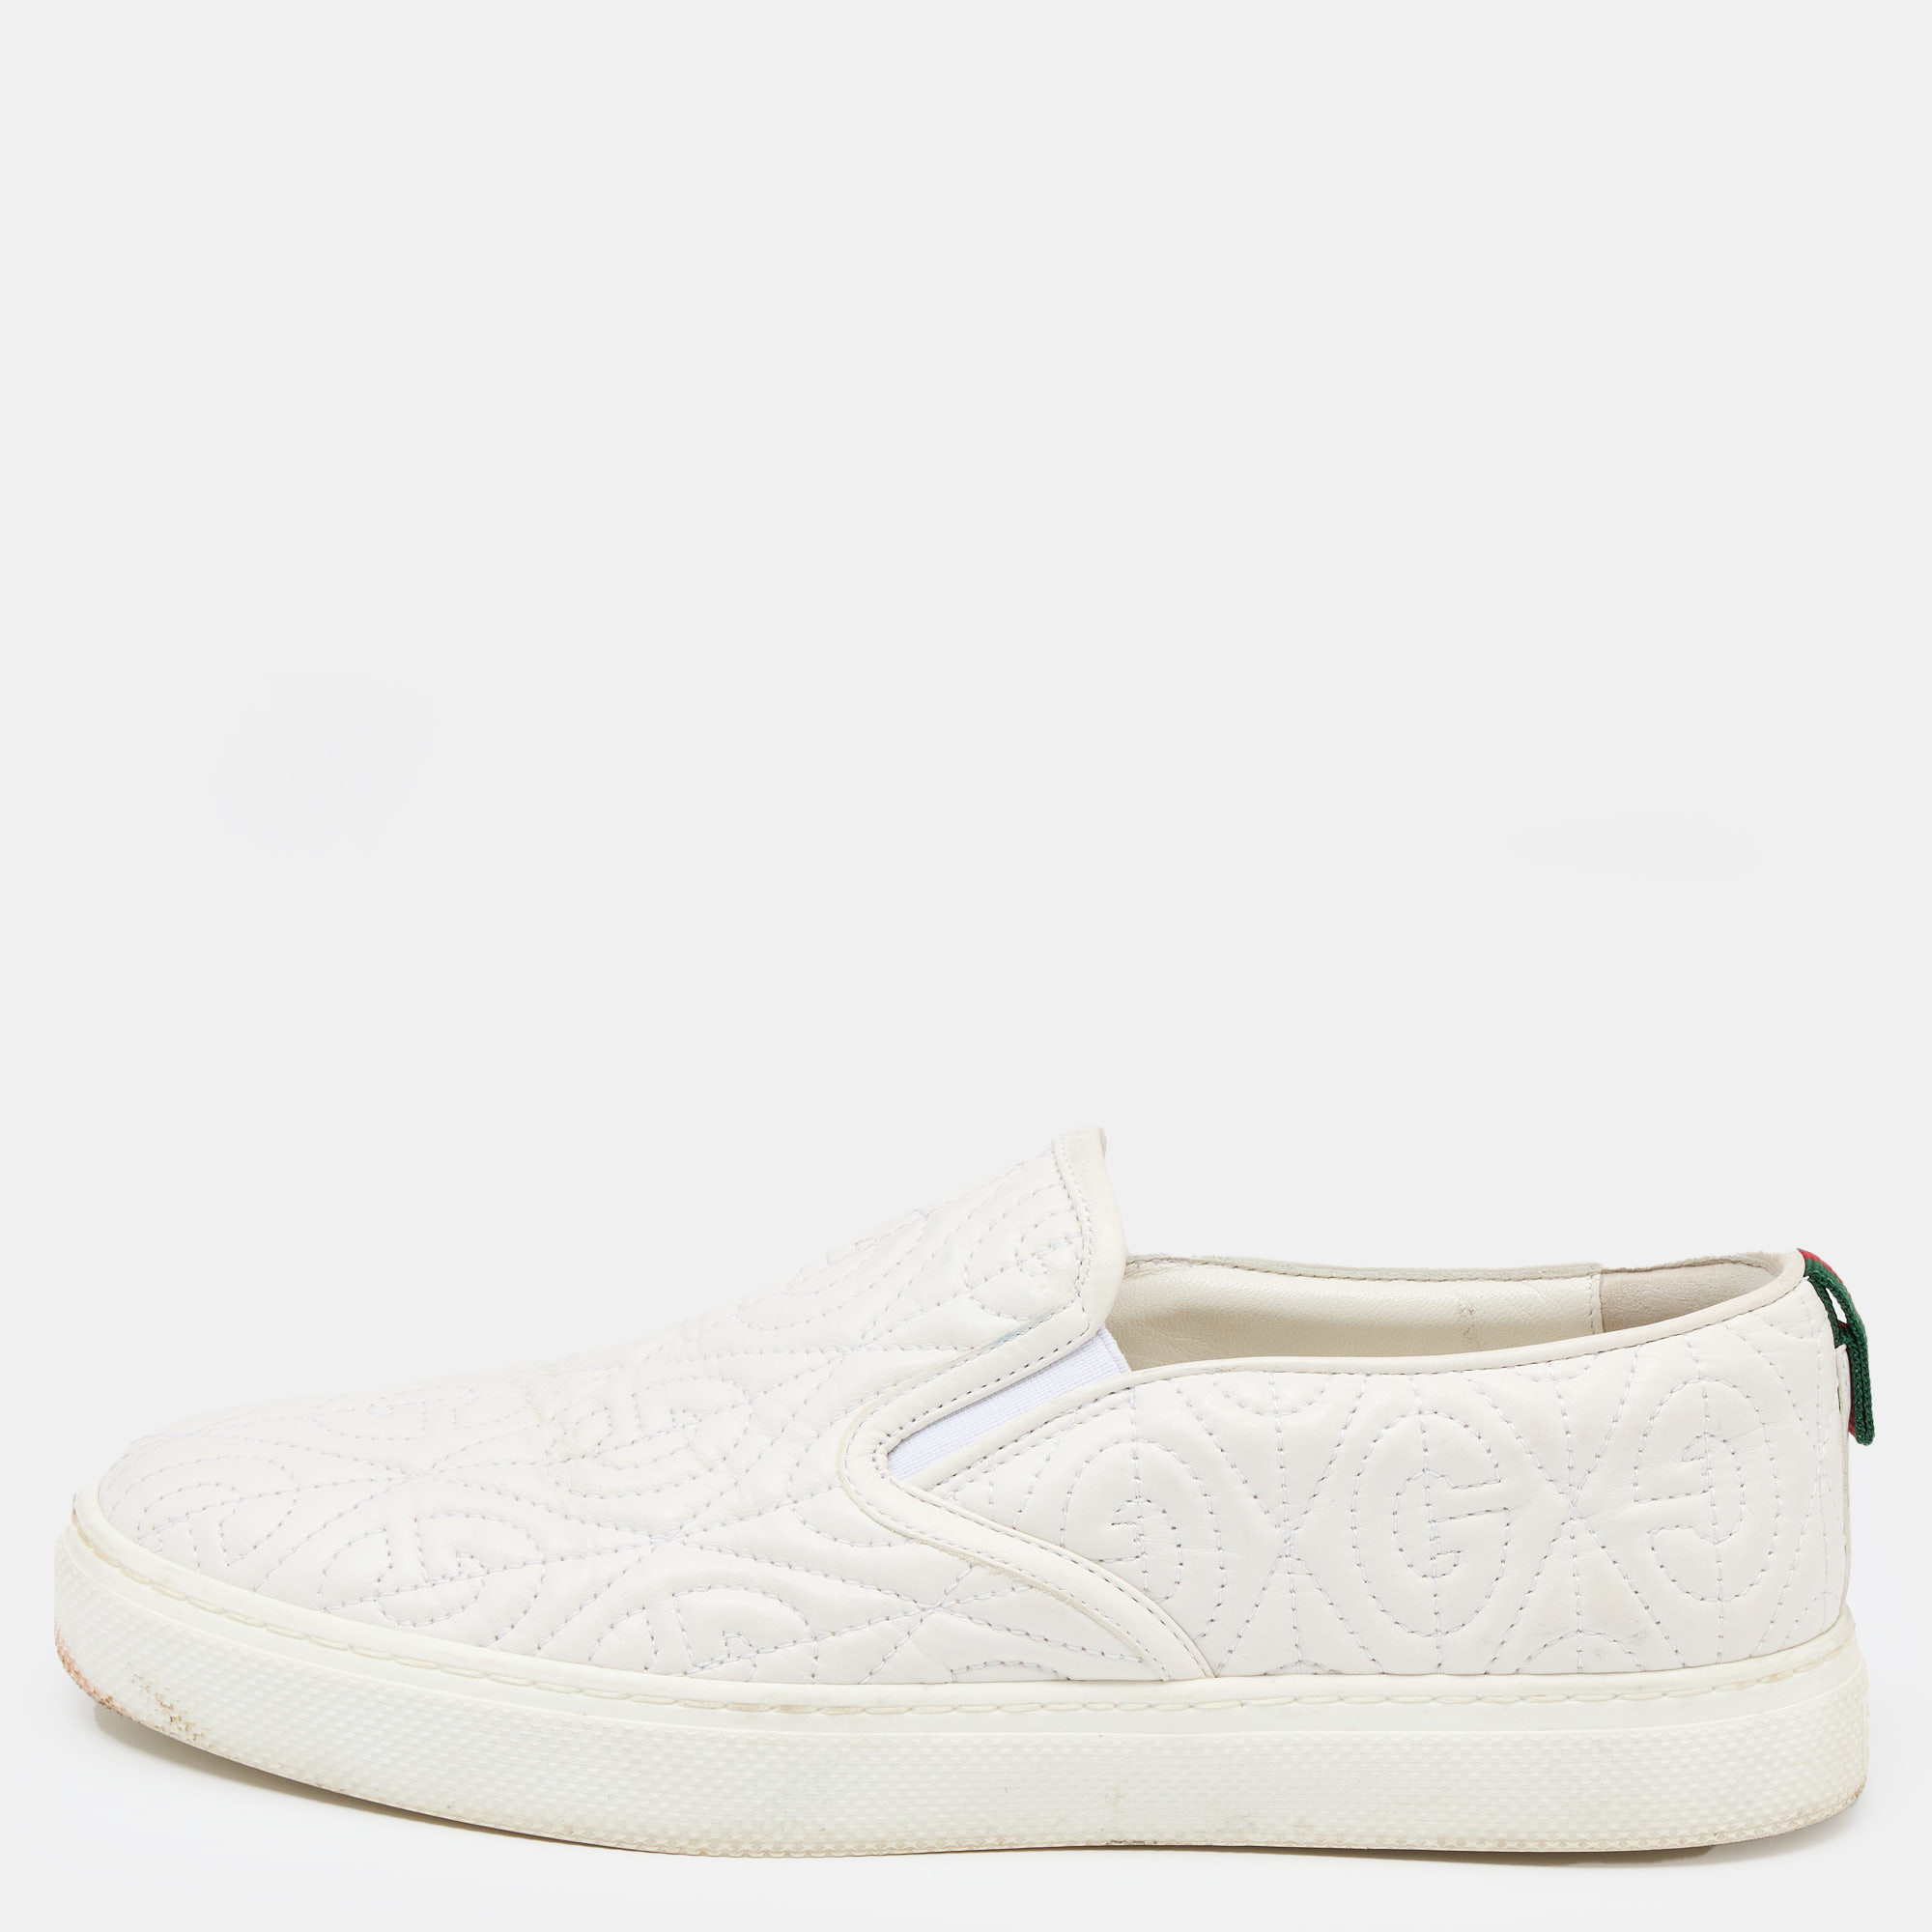 Pre-owned Gucci White Leather Dublin G Rhombus Slip On Sneakers Size 41